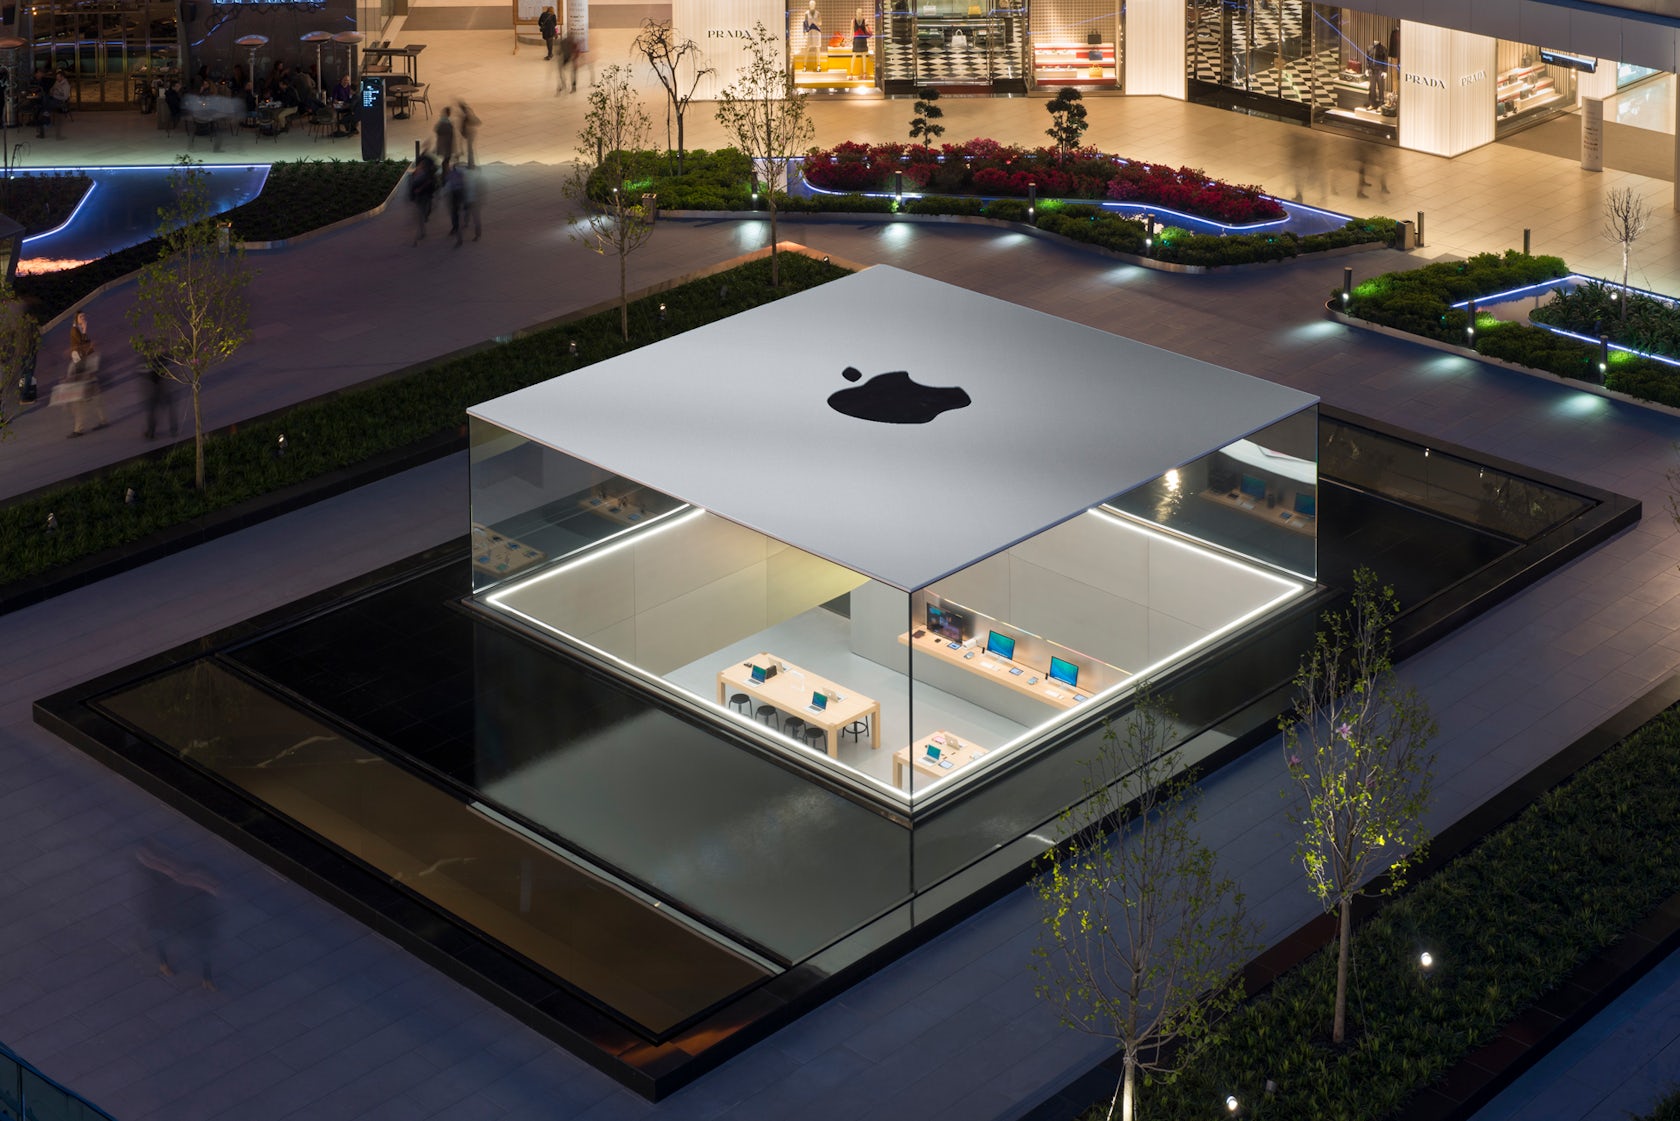 The Immaculate Architectural Details of Apple Stores - Architizer Journal